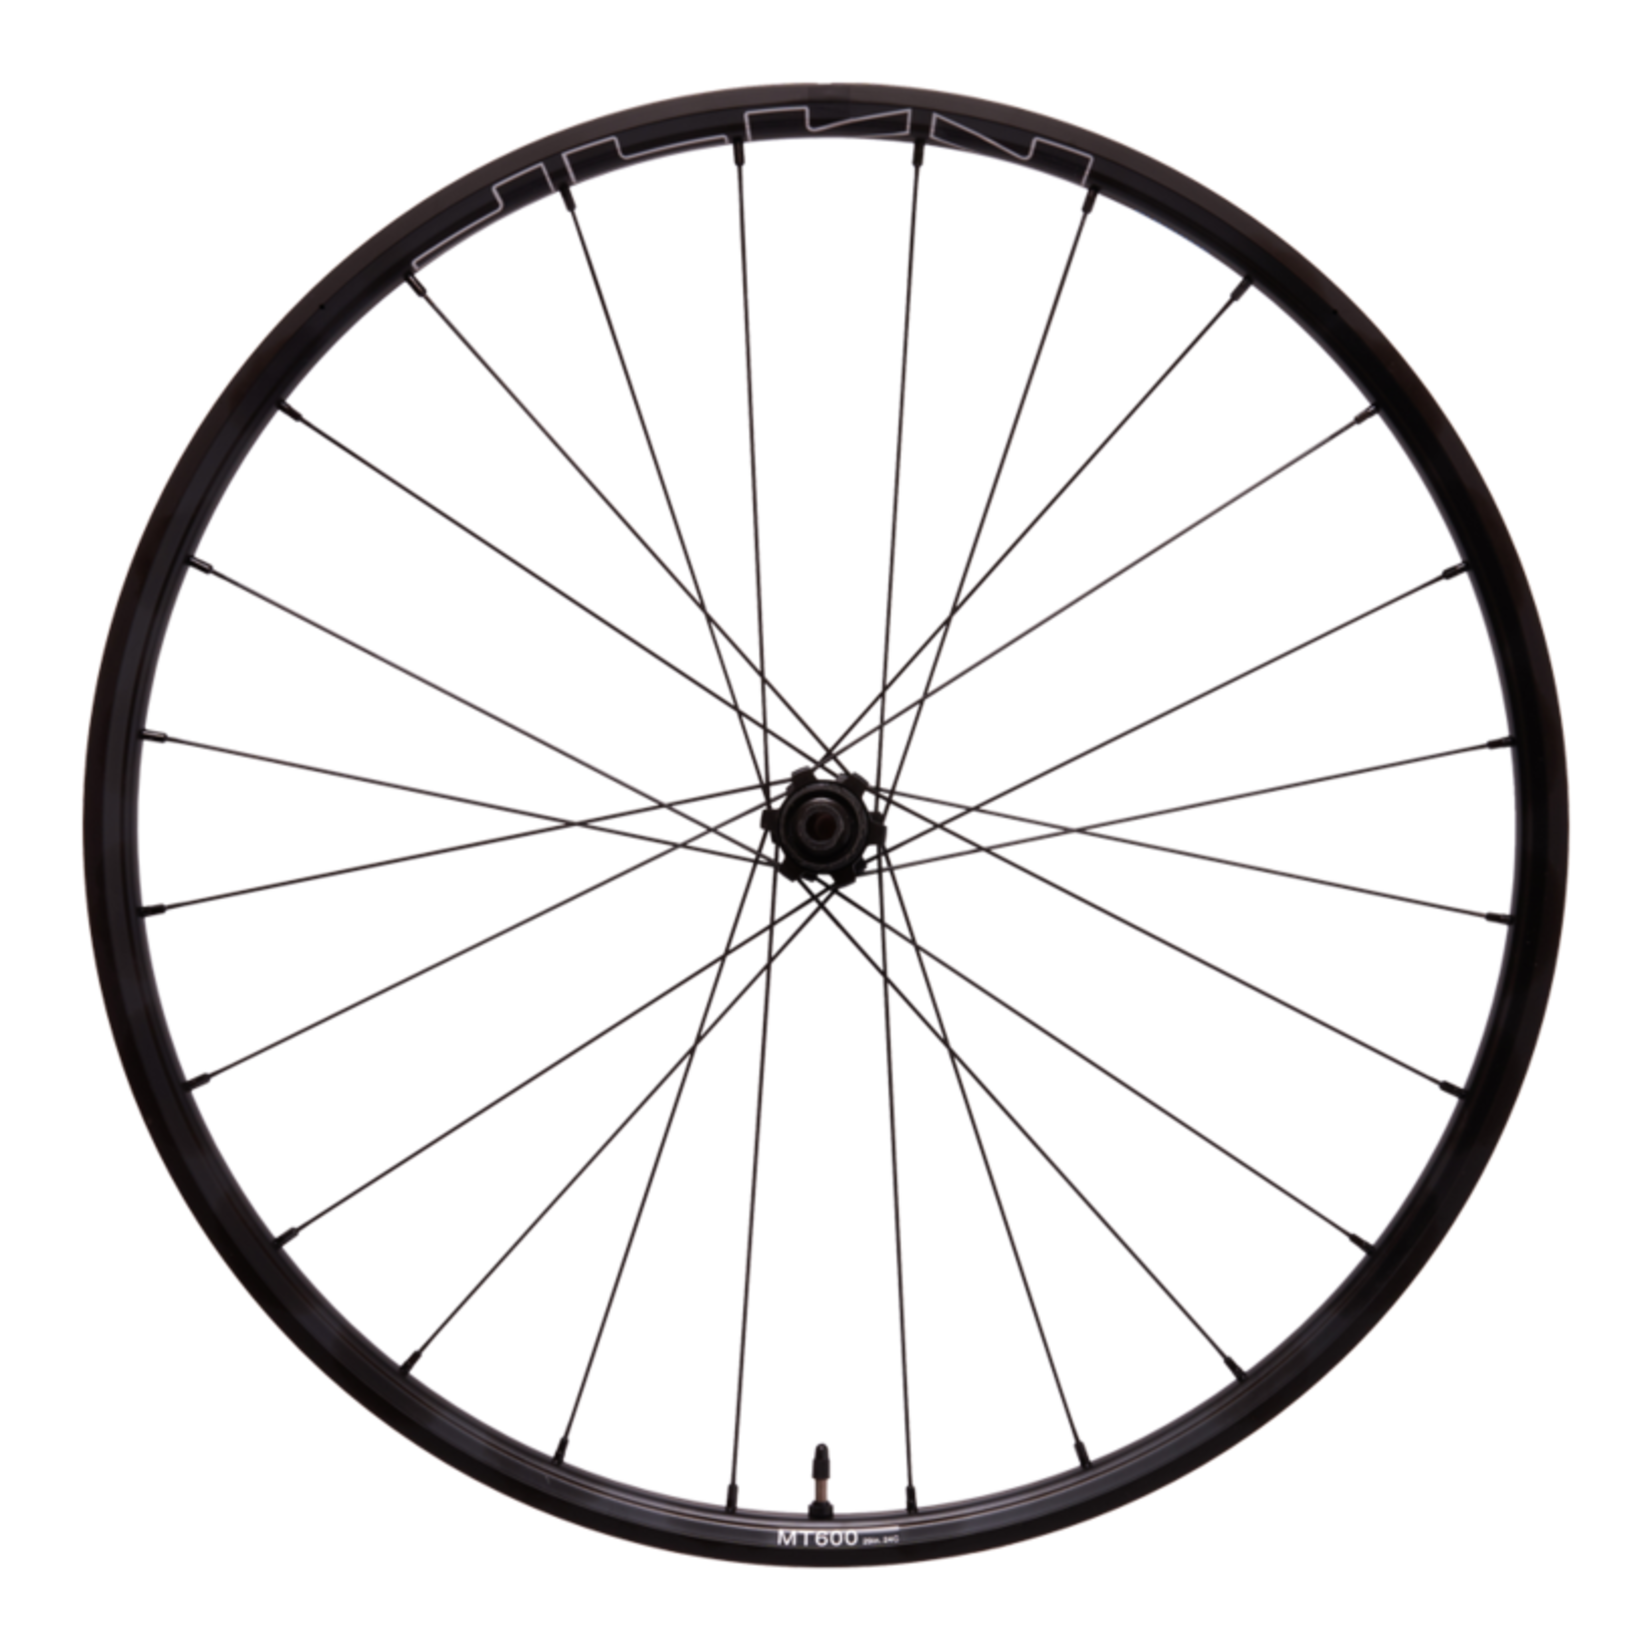 Shimano WHEEL, WH-MT600-29, REAR, RIM:29, 24H, FOR 11-S, R:12MM E-THRU CLINCHER(TUBELESS COMPATIBLE) OLD:142MM, BLACK, W/RIM TAPE, CL DISC